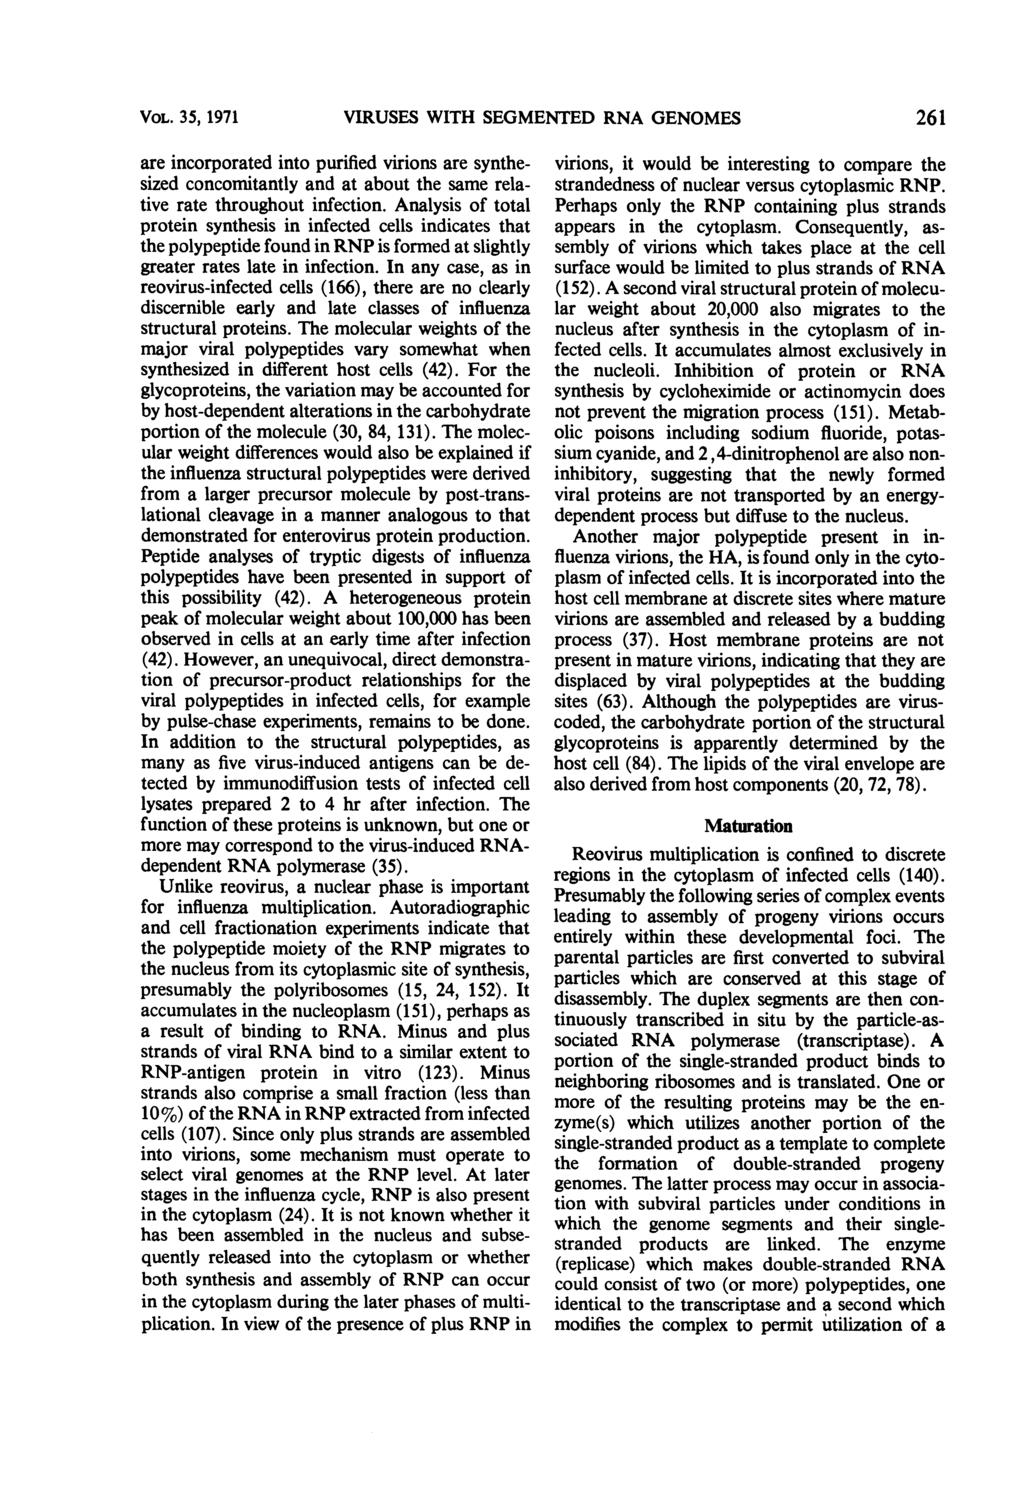 VOL. 35, 1971 are incorporated into purified virions are synthesized concomitantly and at about the same relative rate throughout infection.